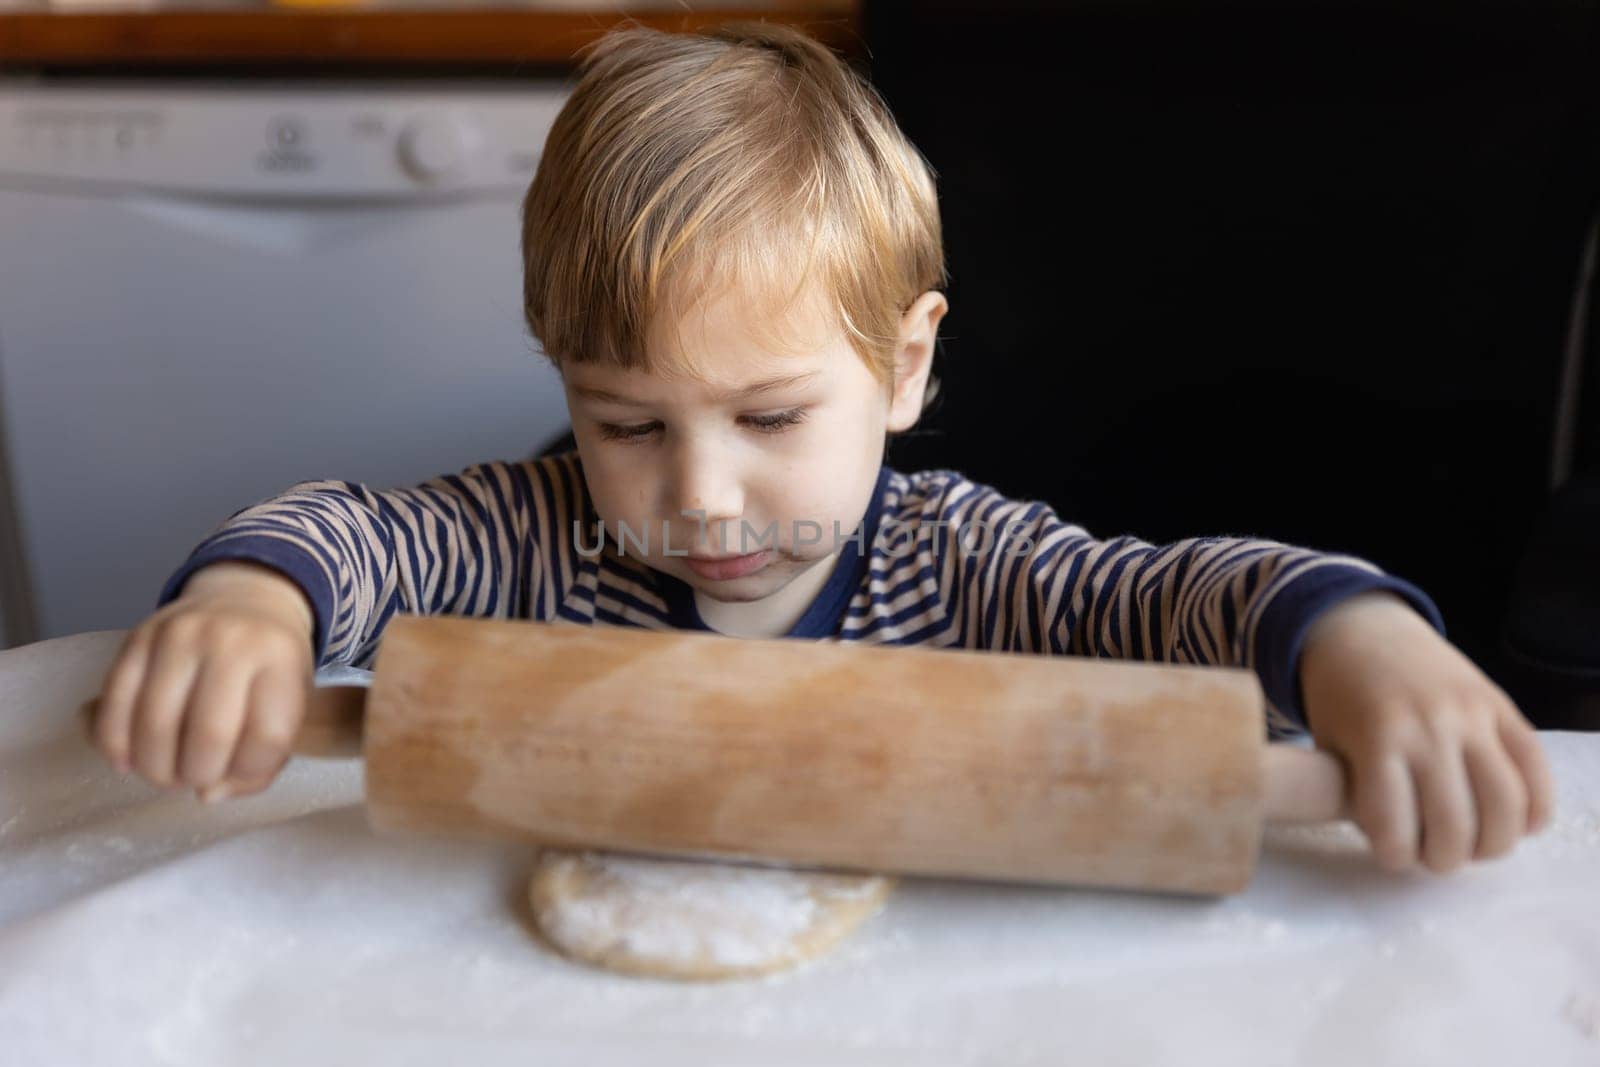 Family cooking - a little boy rolls out dough with a rolling pin. Mid shot